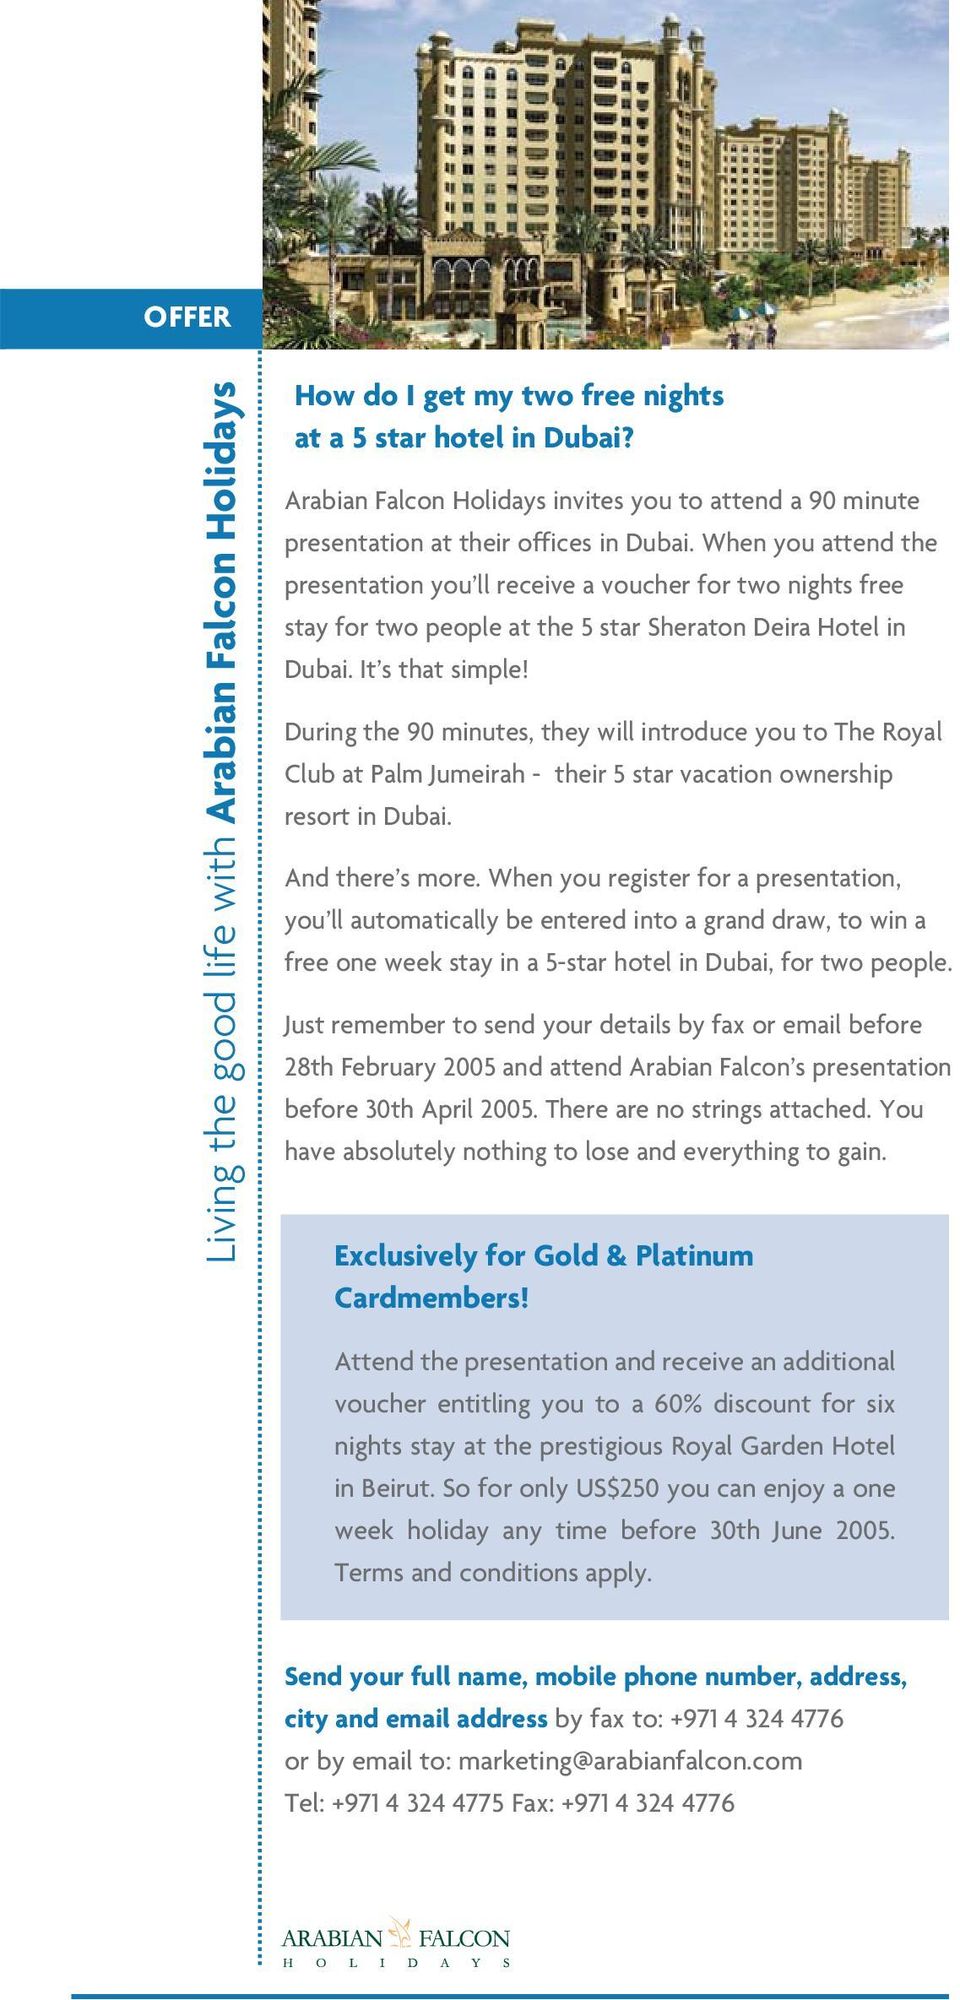 When you attend the presentation you ll receive a voucher for two nights free stay for two people at the 5 star Sheraton Deira Hotel in Dubai. It s that simple!